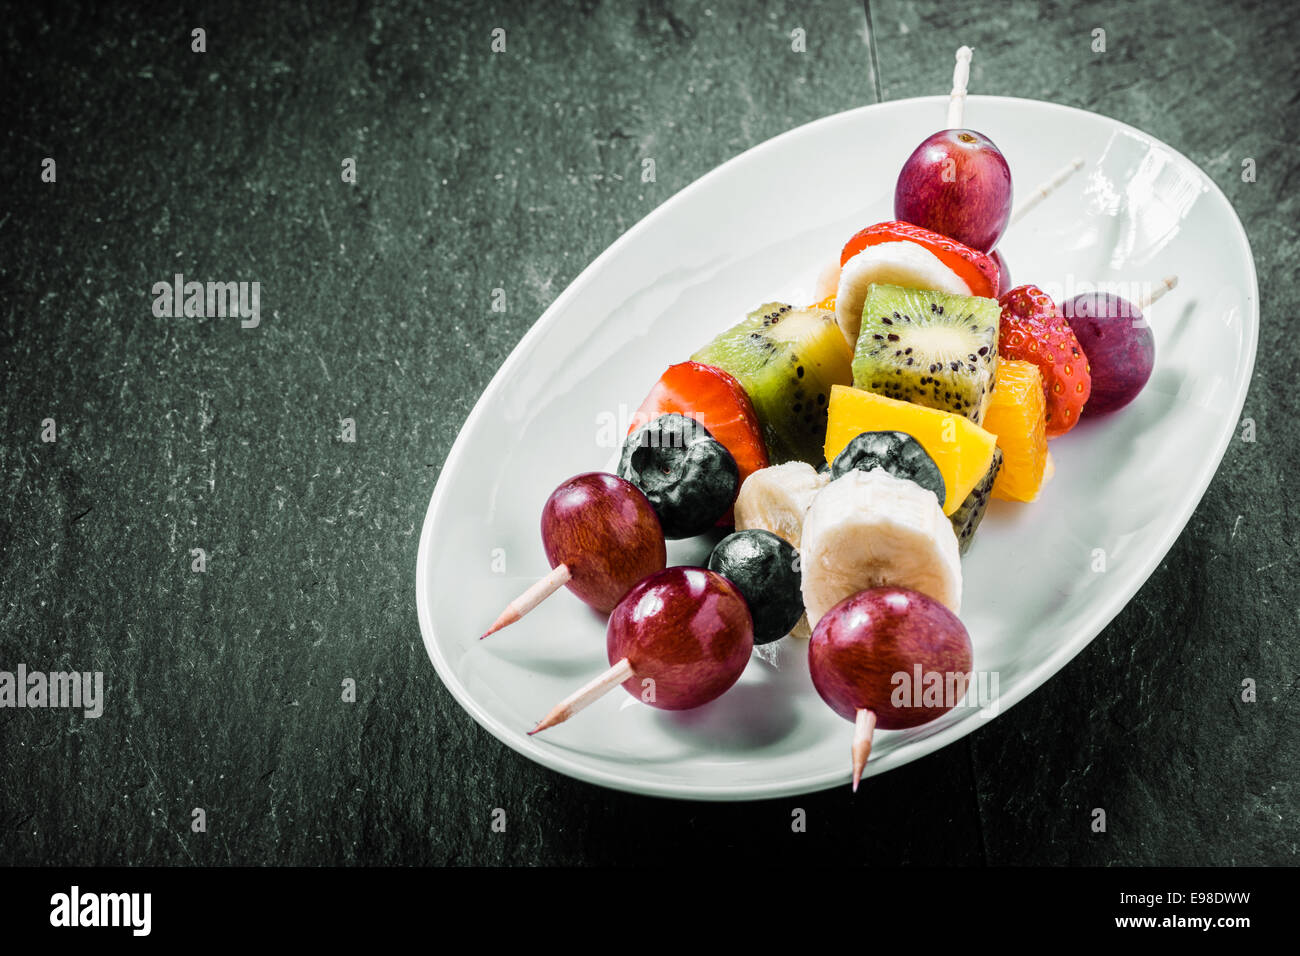 Colorful exotic fruit kebabs served on an oval dish with grapes, kiwifruit, orange, banana, blueberries, and strawberries on a dark background with copyspace Stock Photo